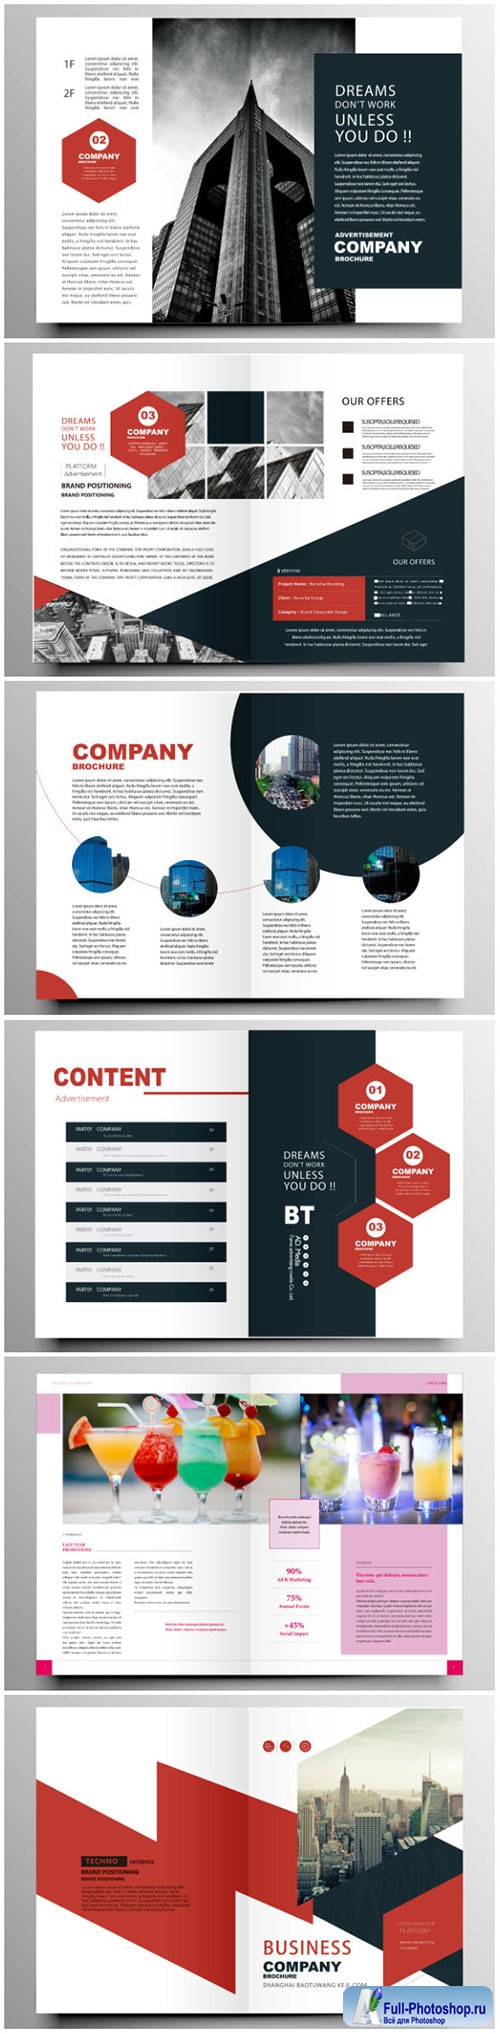 Brochure template vector layout design, corporate business annual report, magazine, flyer mockup # 192